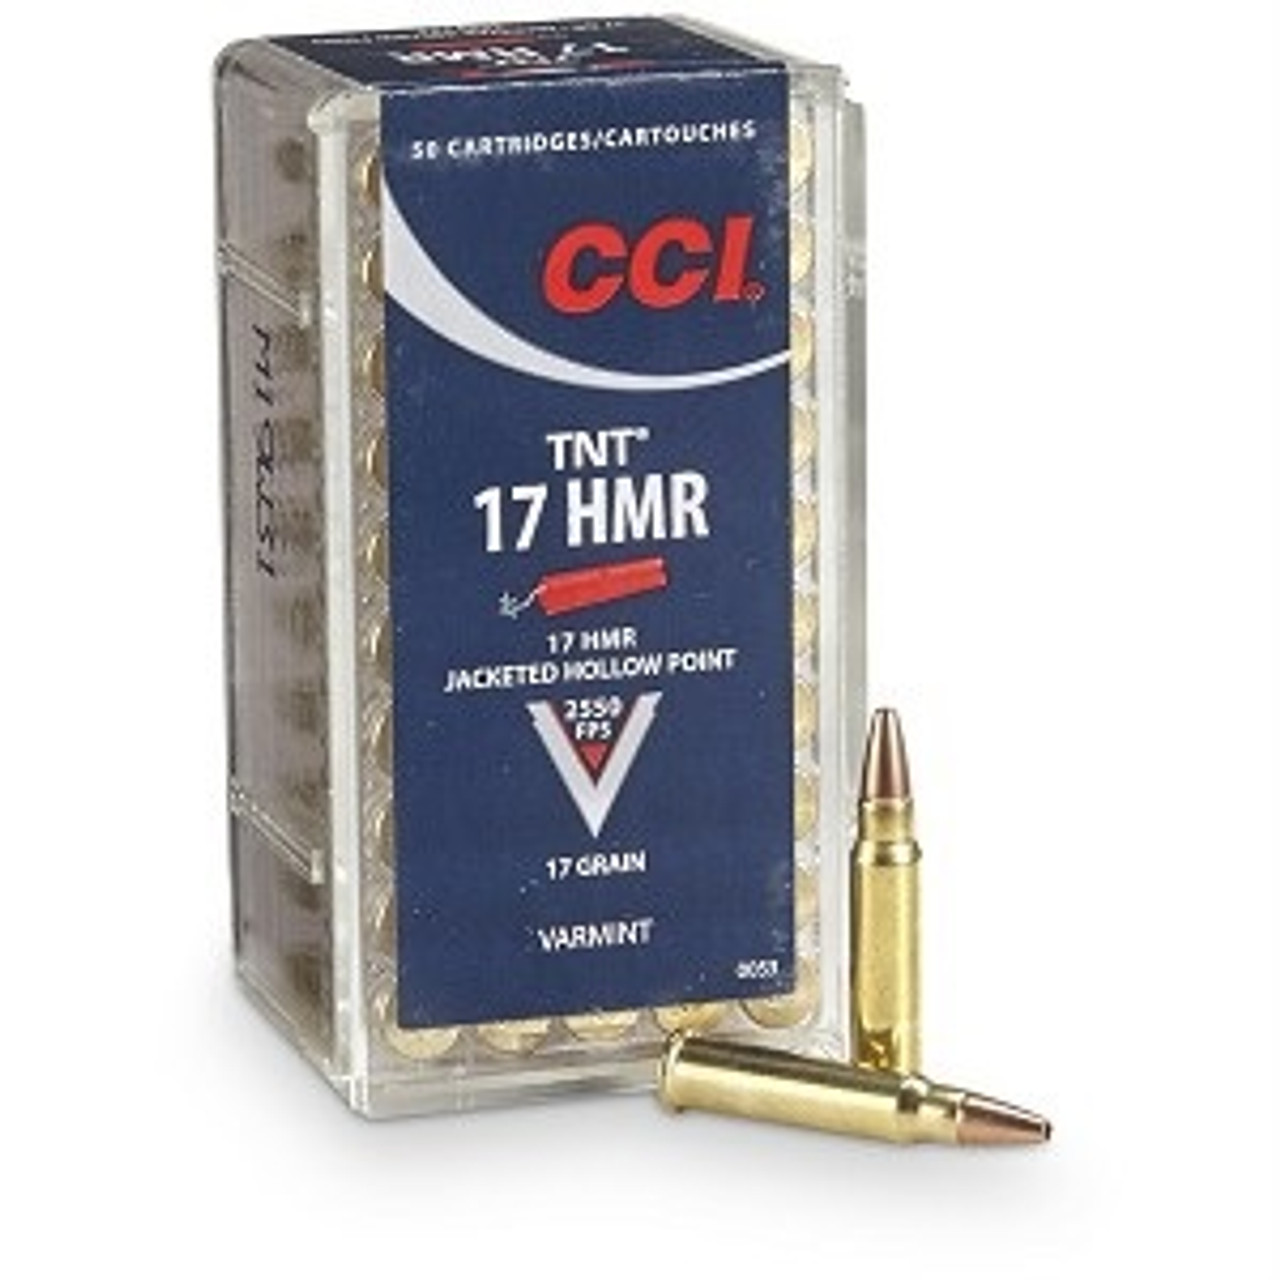 50 rounds per box

Get match-grade accuracy and maximum lethality on varmints with CCI® TNT®. The 17 HMR load offers a flat trajectory and explosive expansion on impact, as well as reliable CCI priming and brass.

FEATURES
Explosive expansion on impact
Accurate at long ranges
Proven bullet design
Minimal mid-range rise